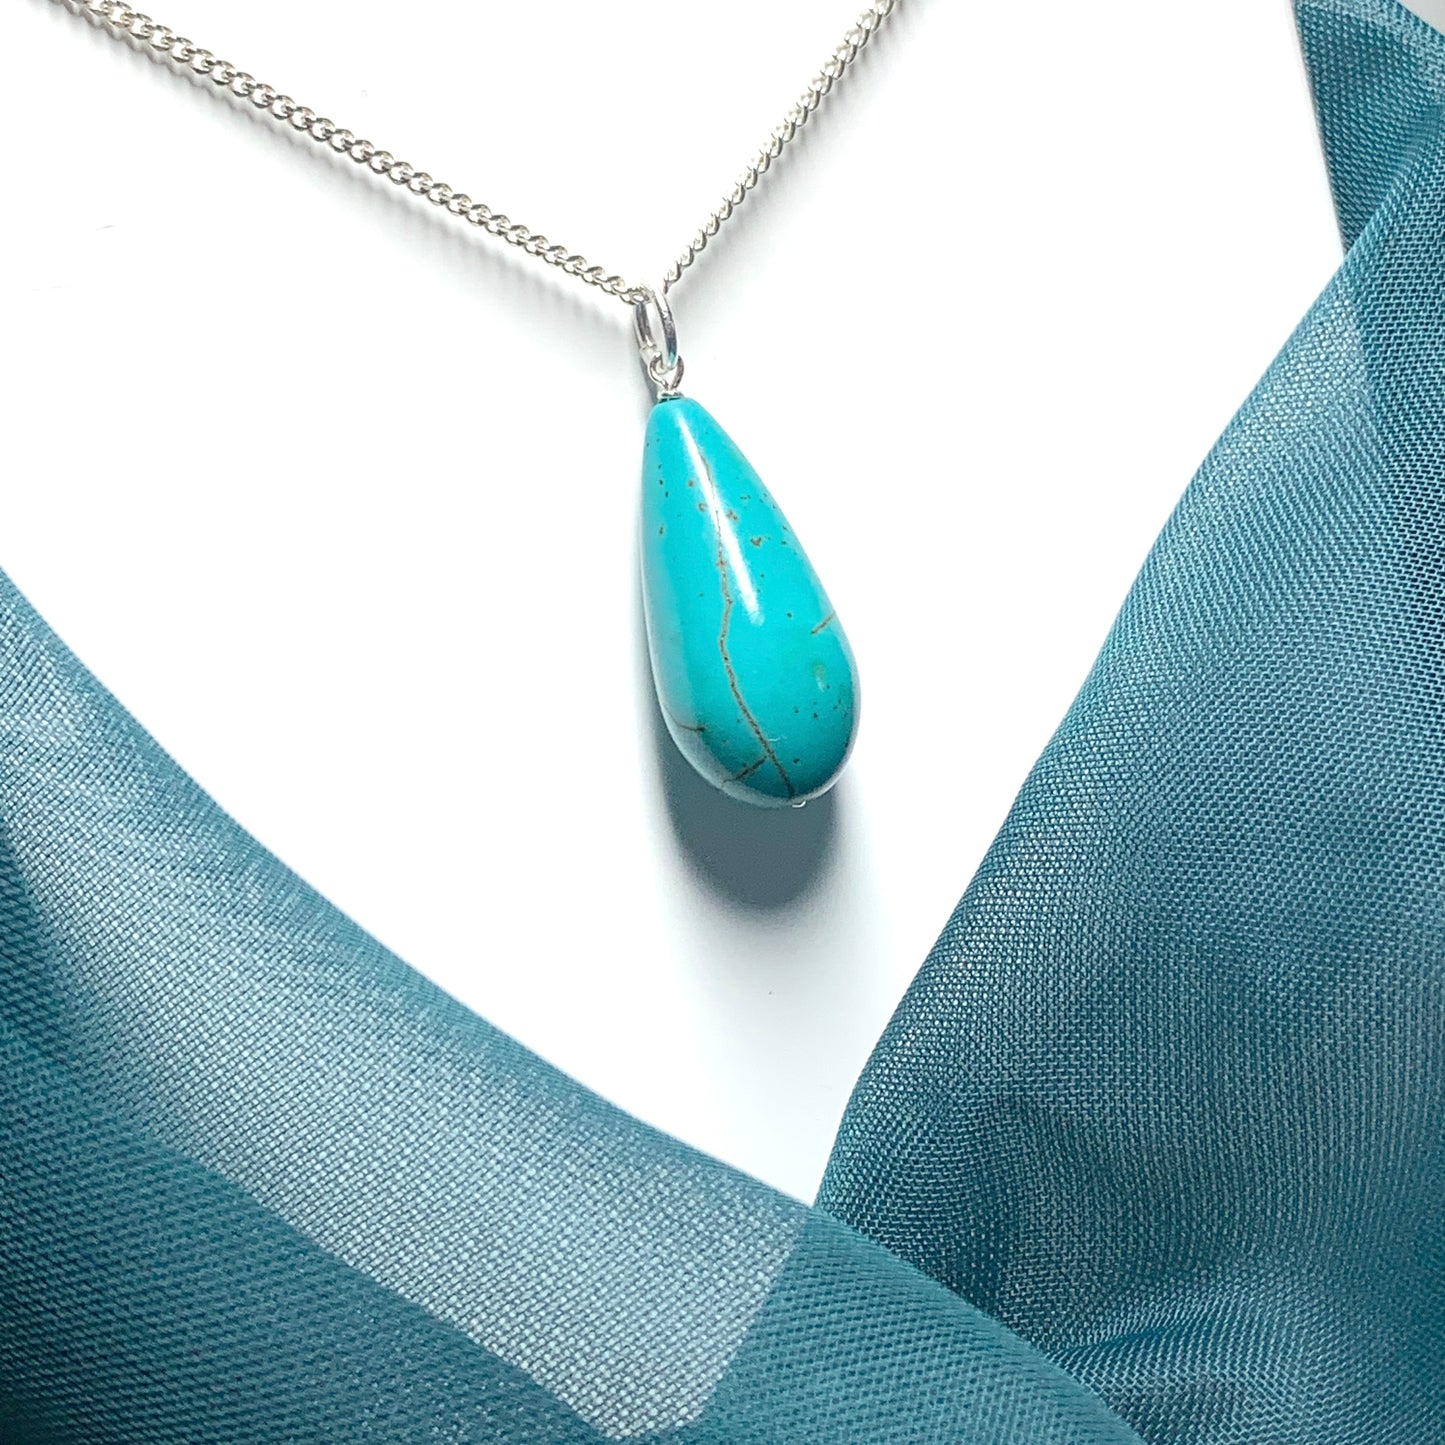 Large Turquoise Tear Drop Sterling Silver Necklace